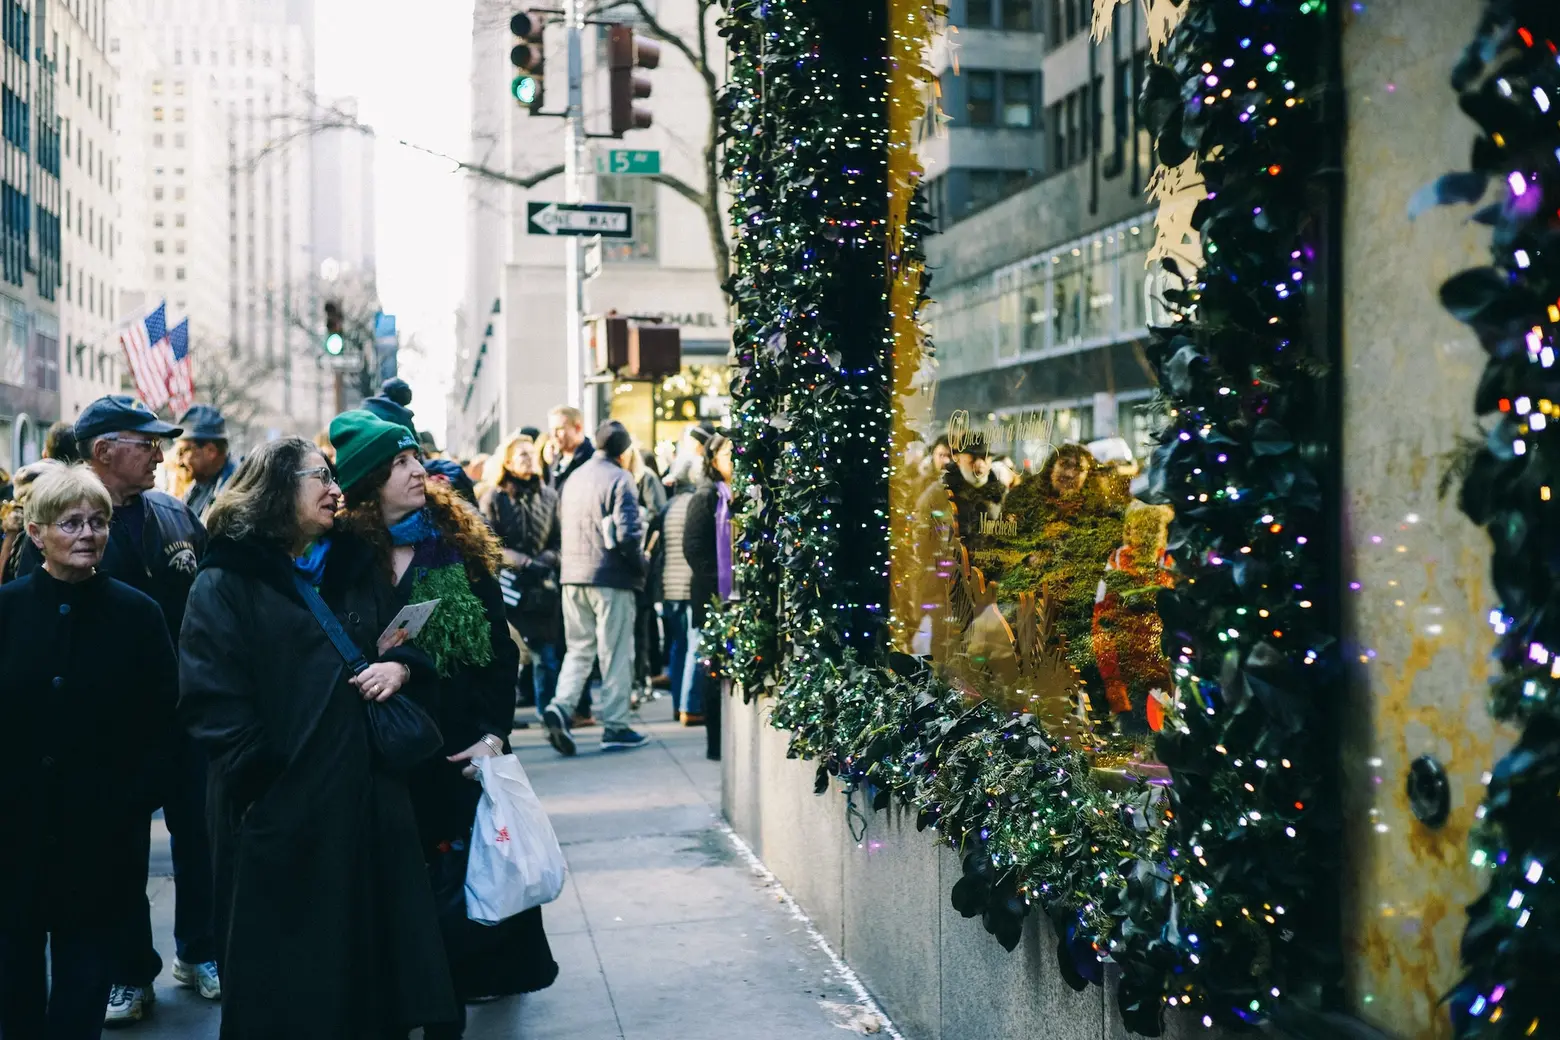 The 8 best neighborhoods in NYC for holiday shopping